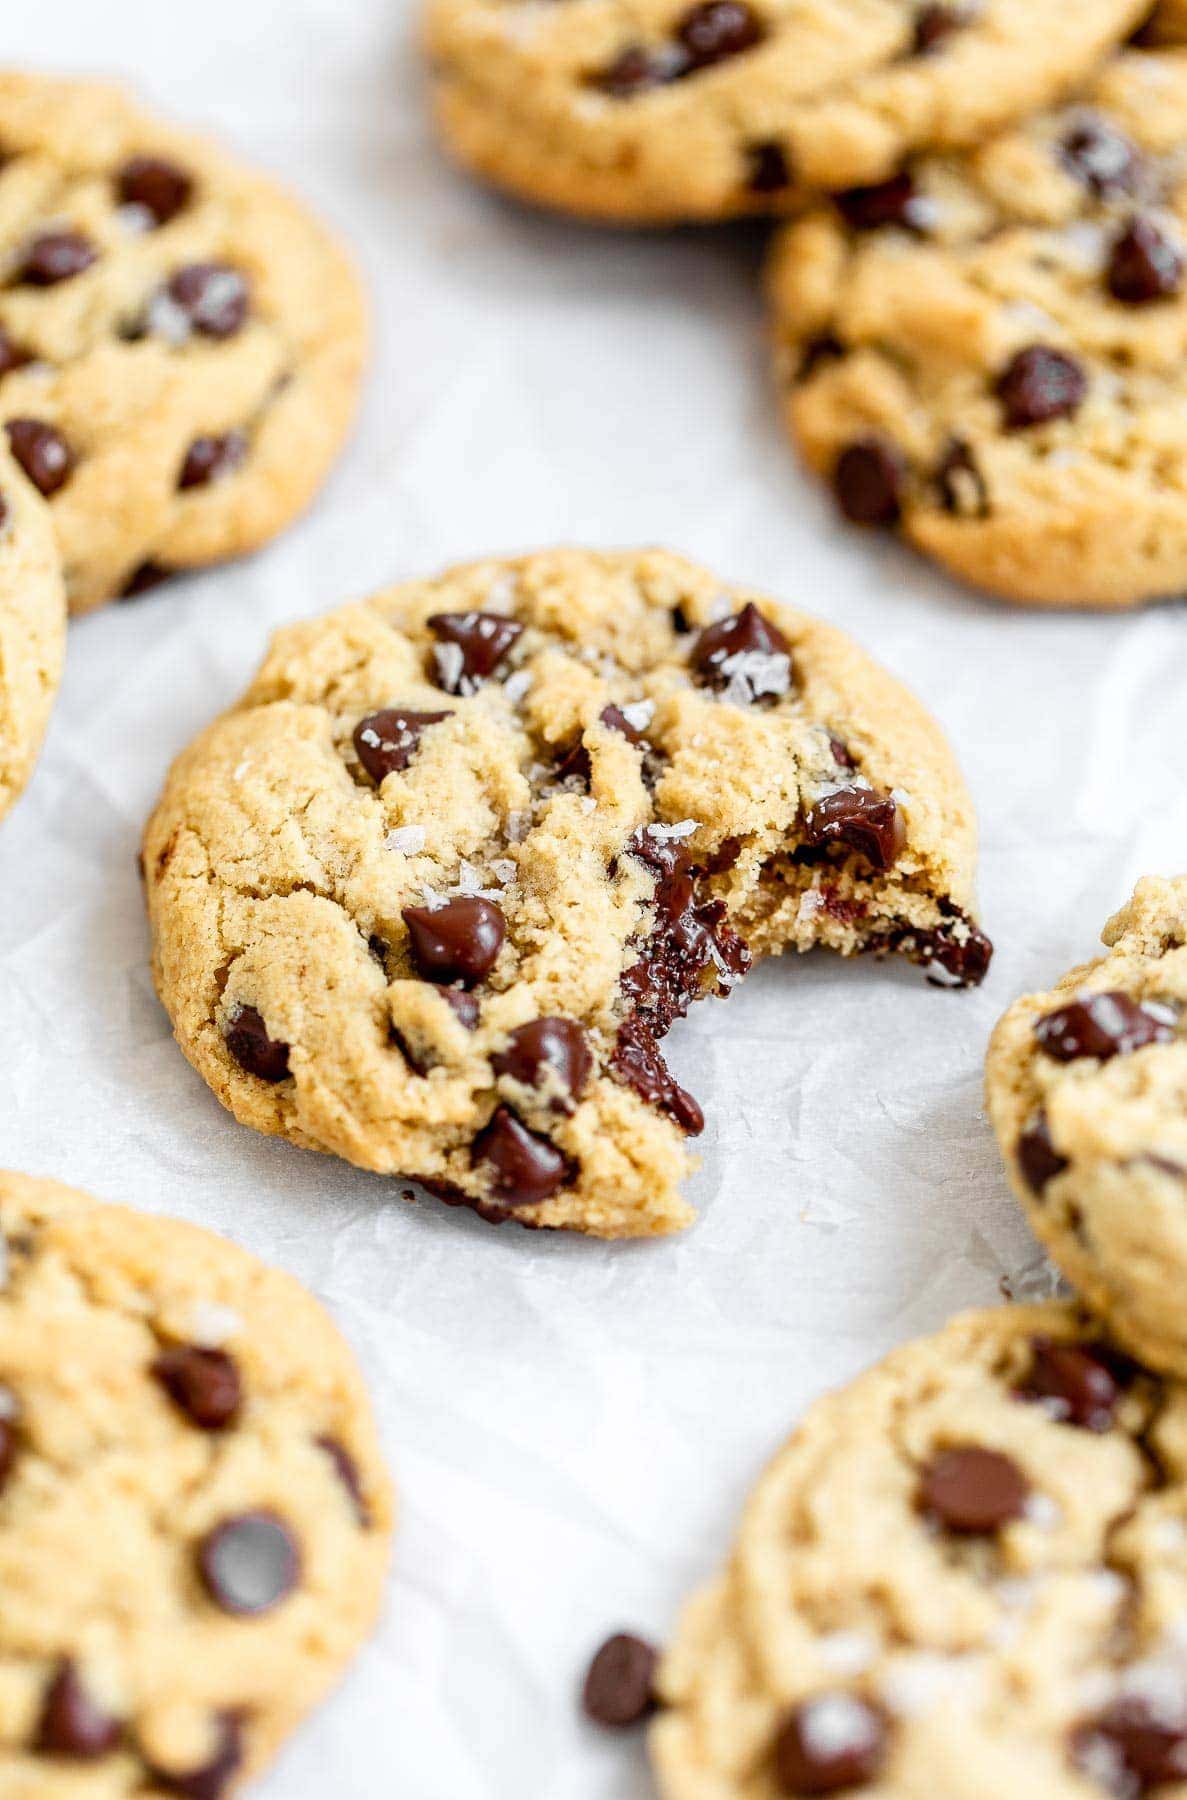 Almond flour cookies with chocolate chips on parchment paper.